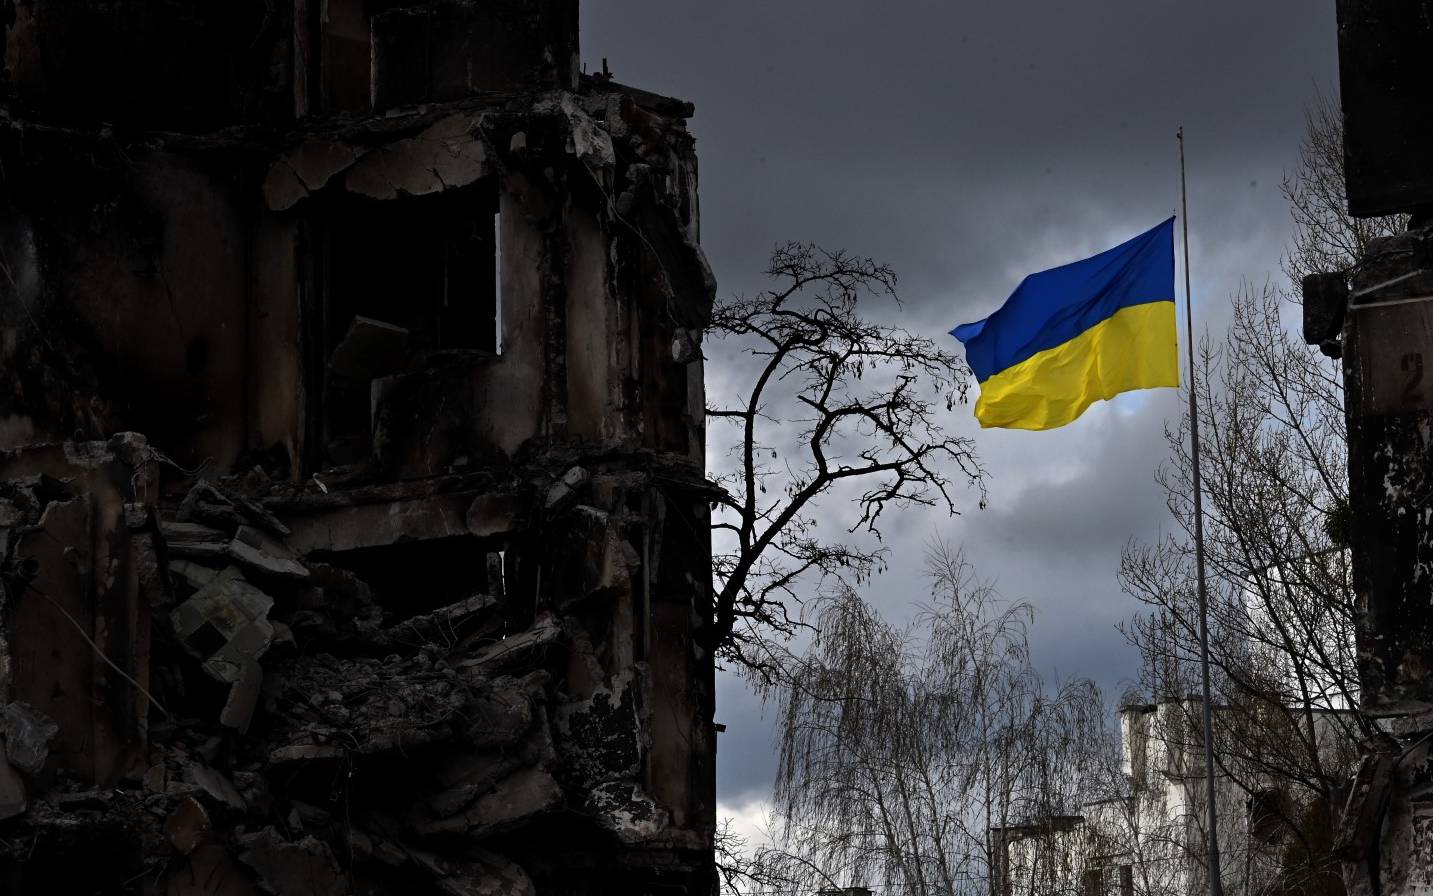 The Ukrainian flag flutters between buildings destroyed in bombardment, in the Ukrainian town of Borodianka, in the Kyiv region on April 17, 2022. - Russia invaded Ukraine on February 24, 2022. (Photo by Sergei SUPINSKY / AFP)